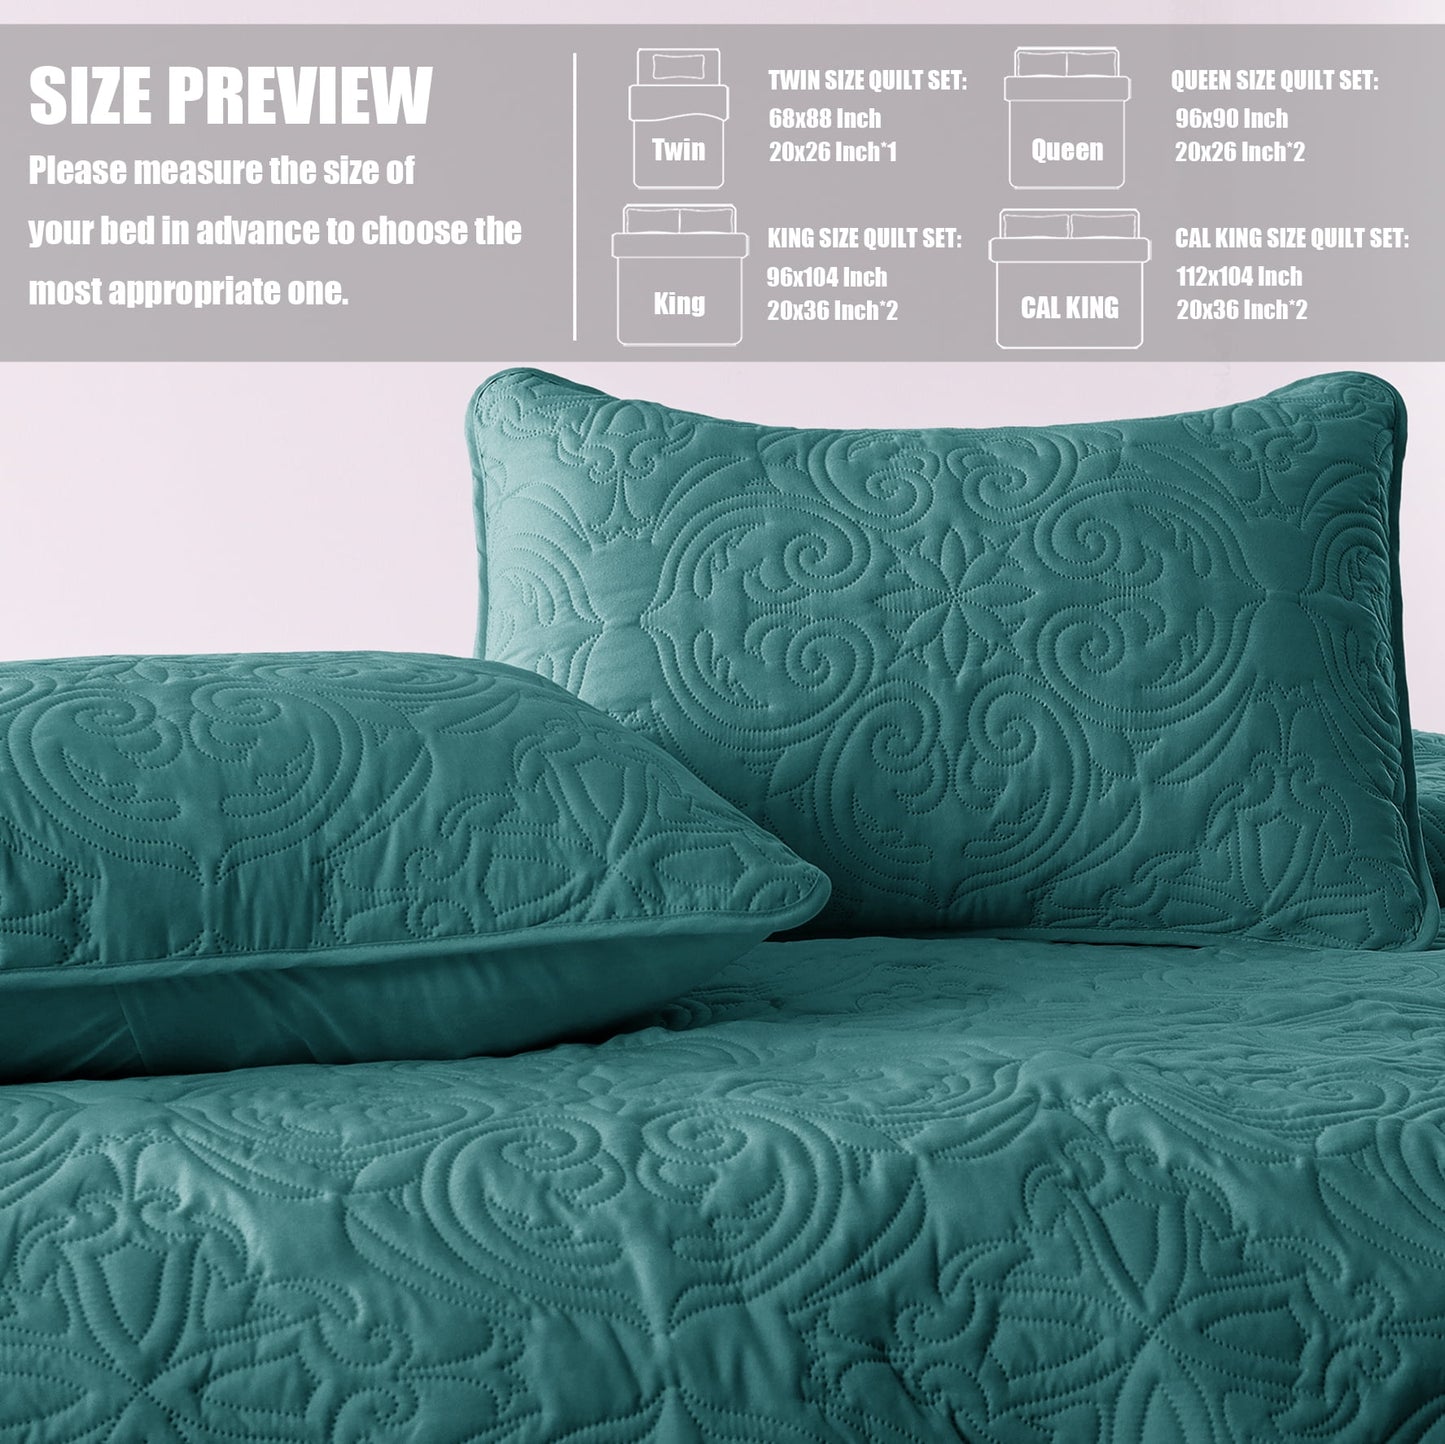 Exclusivo Mezcla Oversized King Quilt Bedding Set, Lightweight Vintage California Cal King Size Quilts with Pillow Shams, Soft Bedspreads Coverlets for All Seasons, (112"x104", Teal)